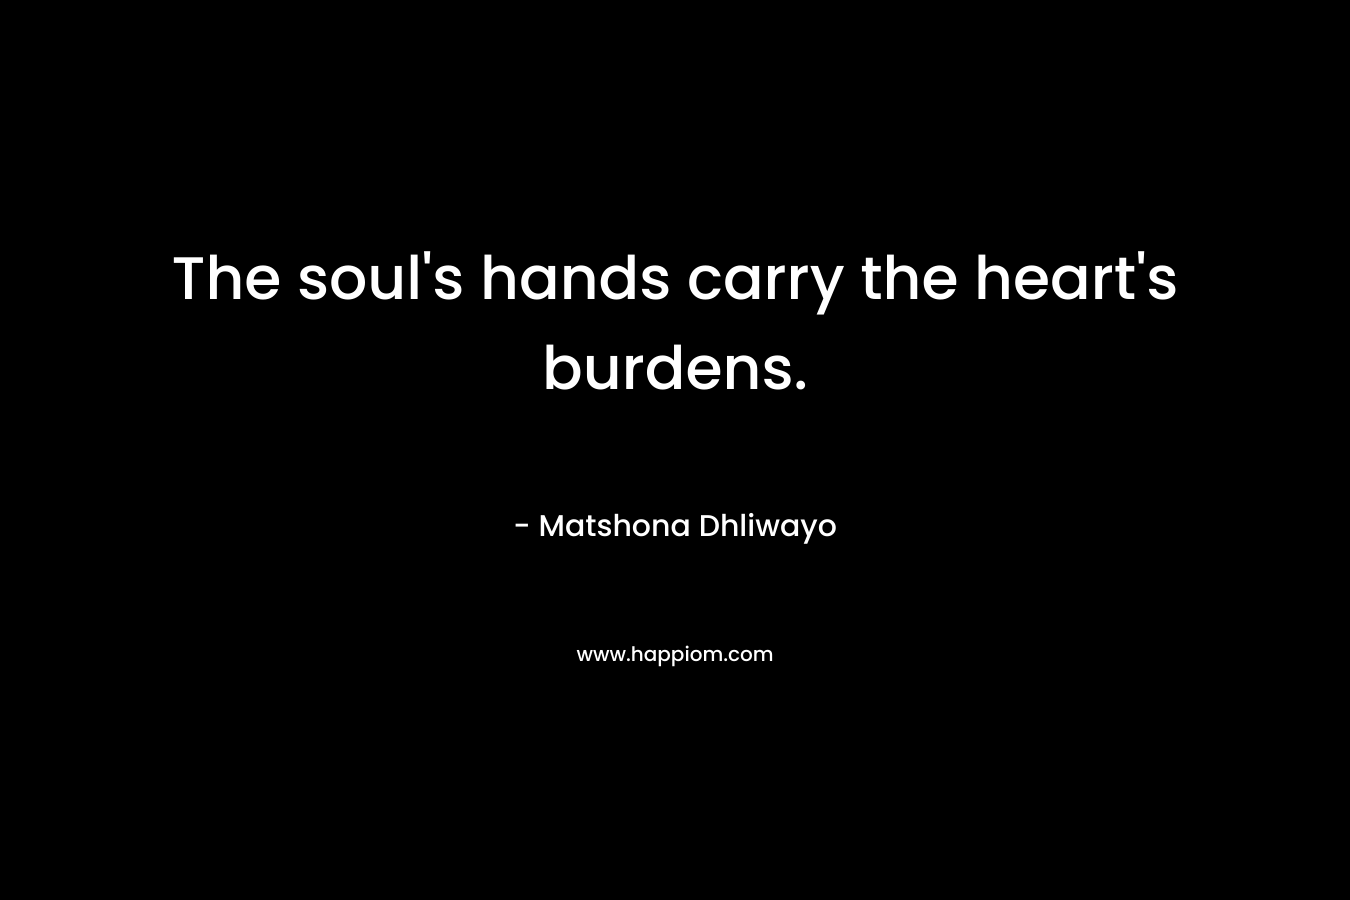 The soul's hands carry the heart's burdens.